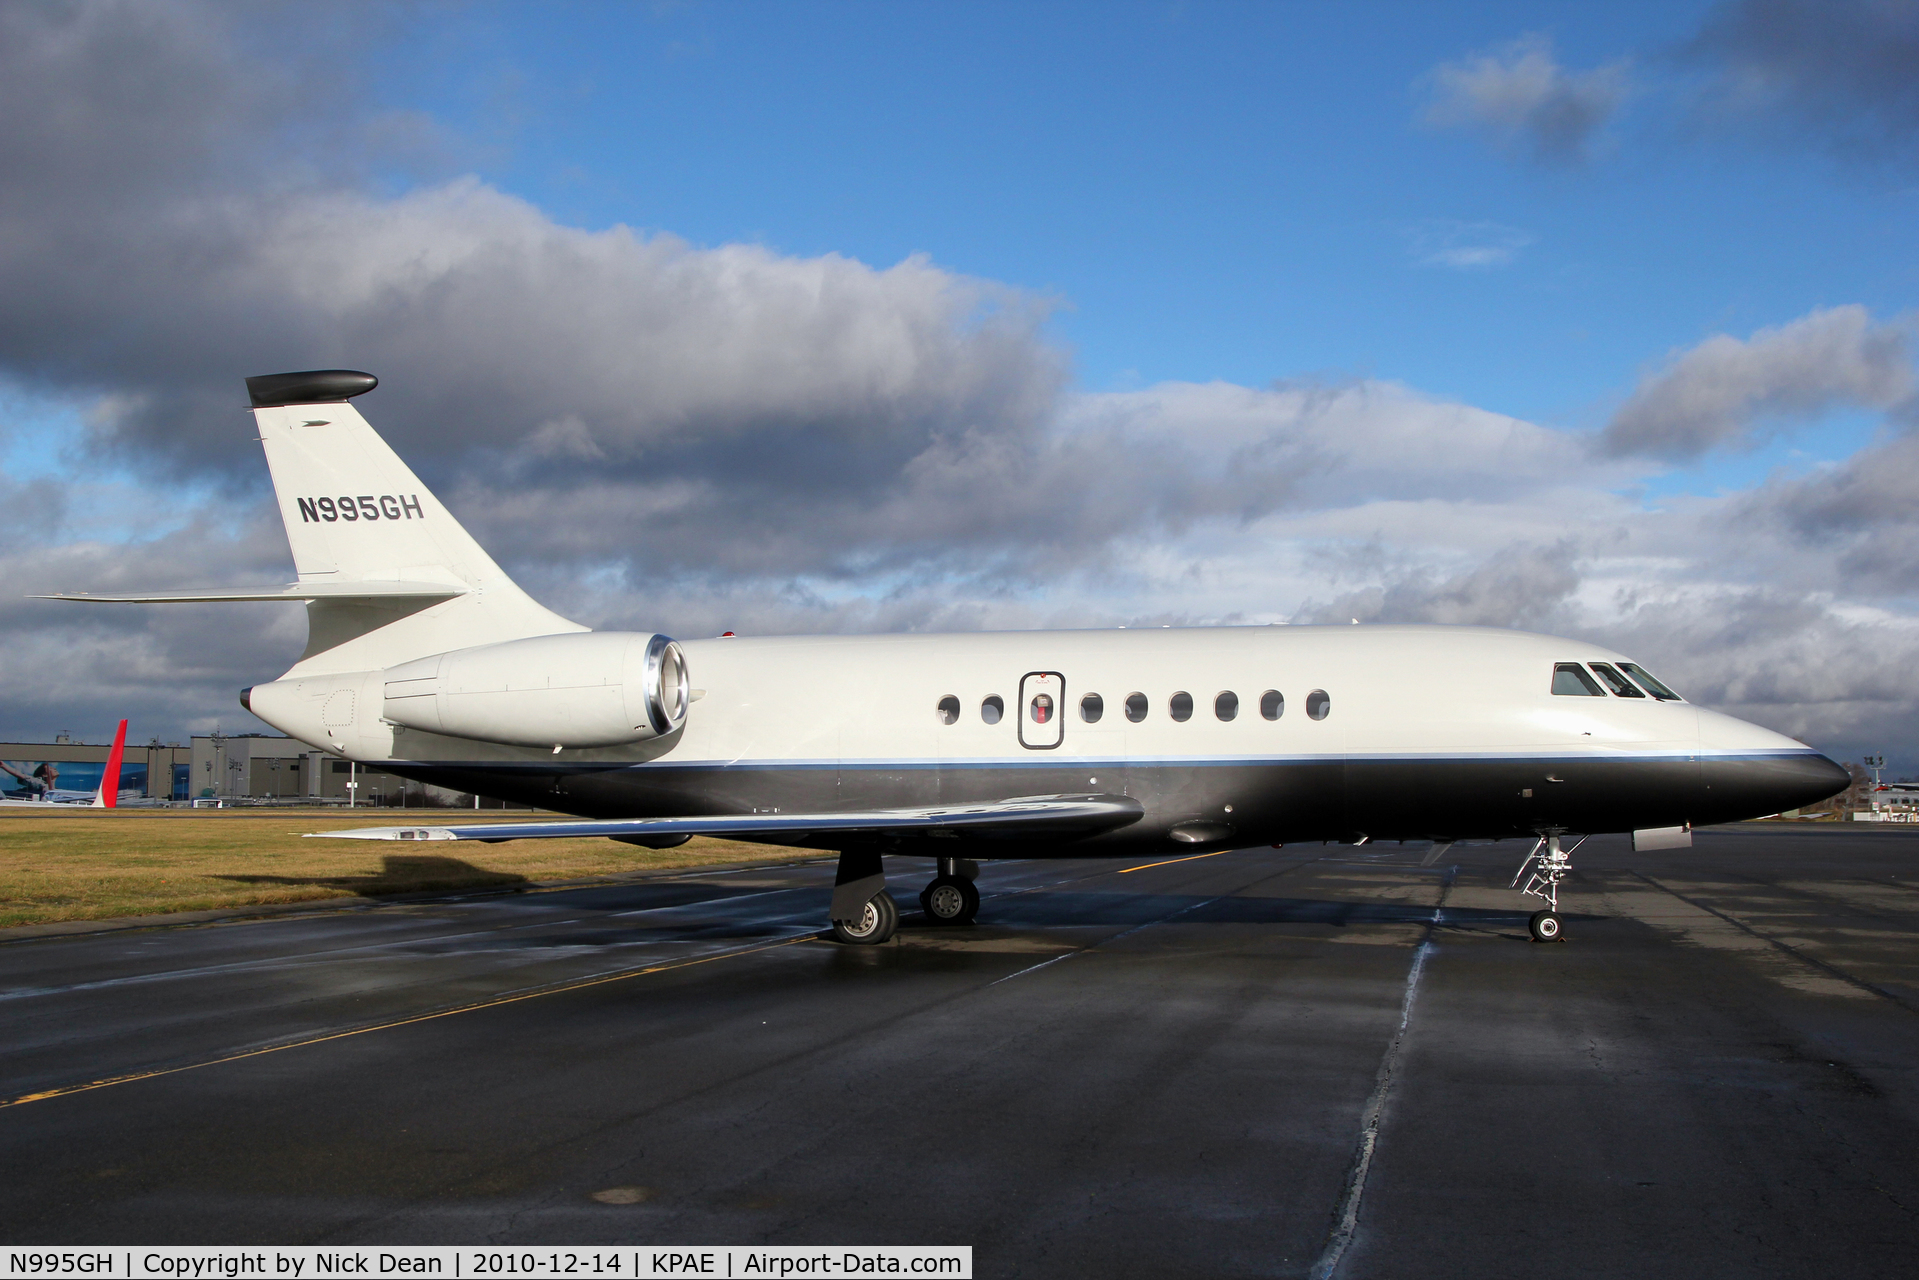 N995GH, 2005 Dassault Falcon 2000EX C/N 72, KPAE Allstate Insurance' 2000 an occasional visitor to Paine Field.